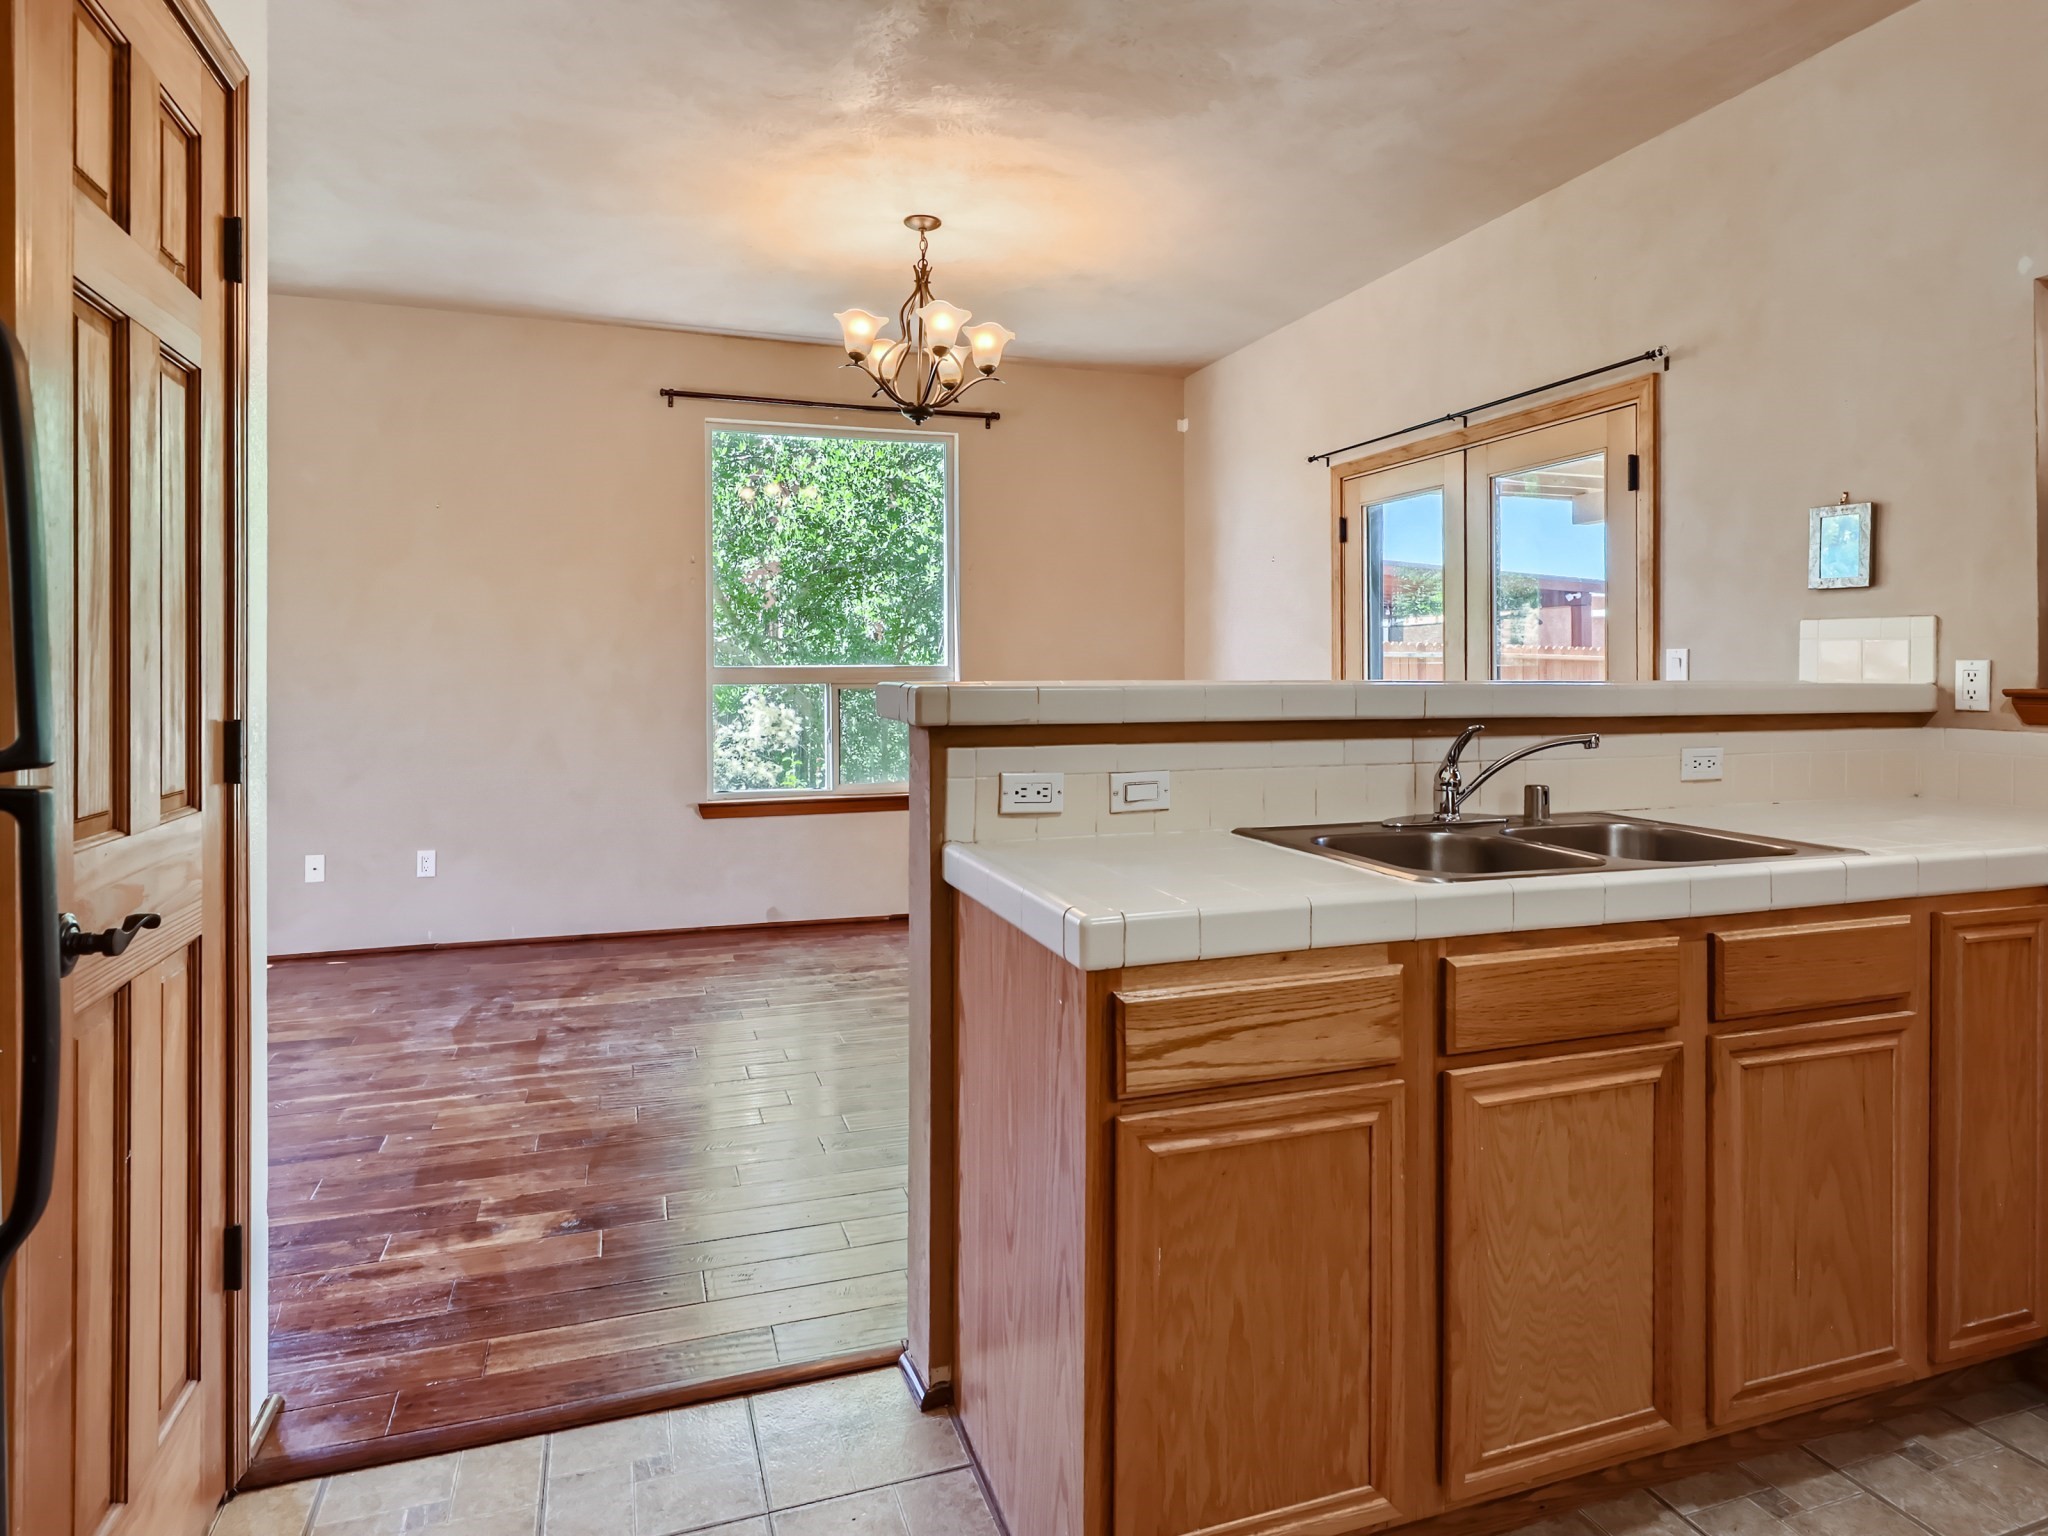 4460 Calle Turquesa, Santa Fe, New Mexico 87507, 2 Bedrooms Bedrooms, ,1 BathroomBathrooms,Residential,For Sale,4460 Calle Turquesa,202338658